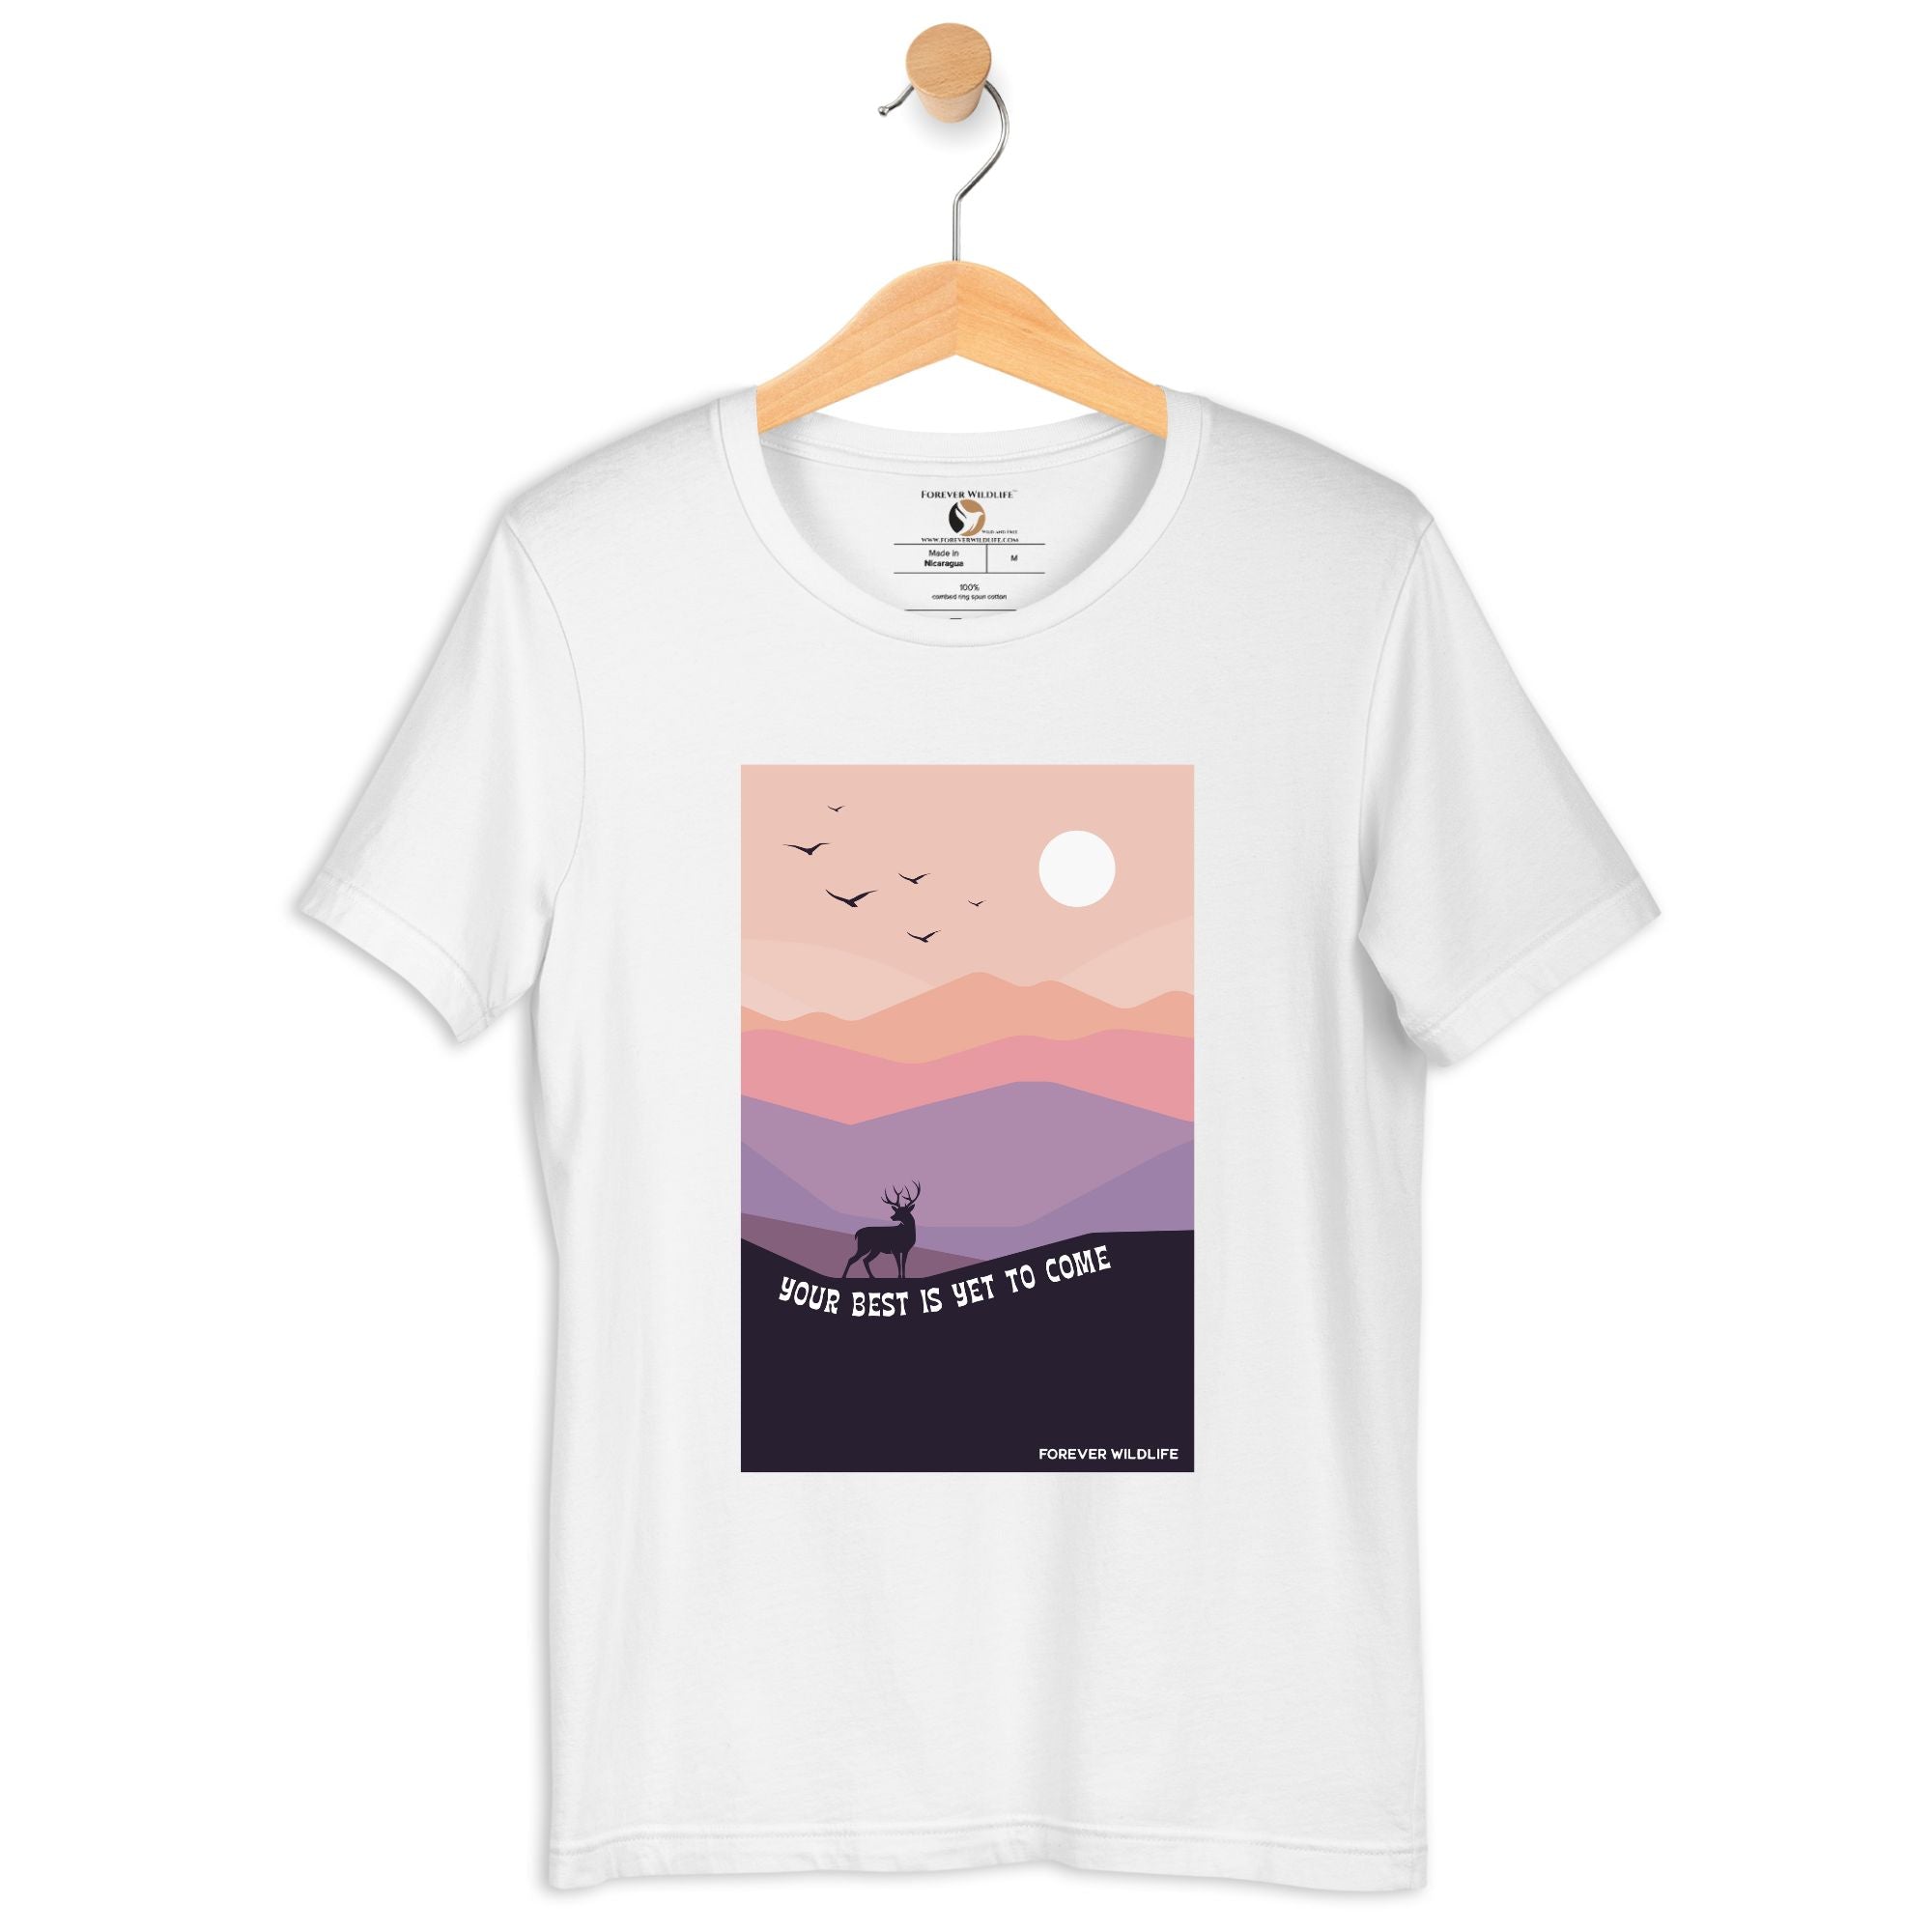 Deer T-Shirt in White – Premium Wildlife T-Shirts Designs, Wildlife Clothing & Apparel from Forever Wildlife